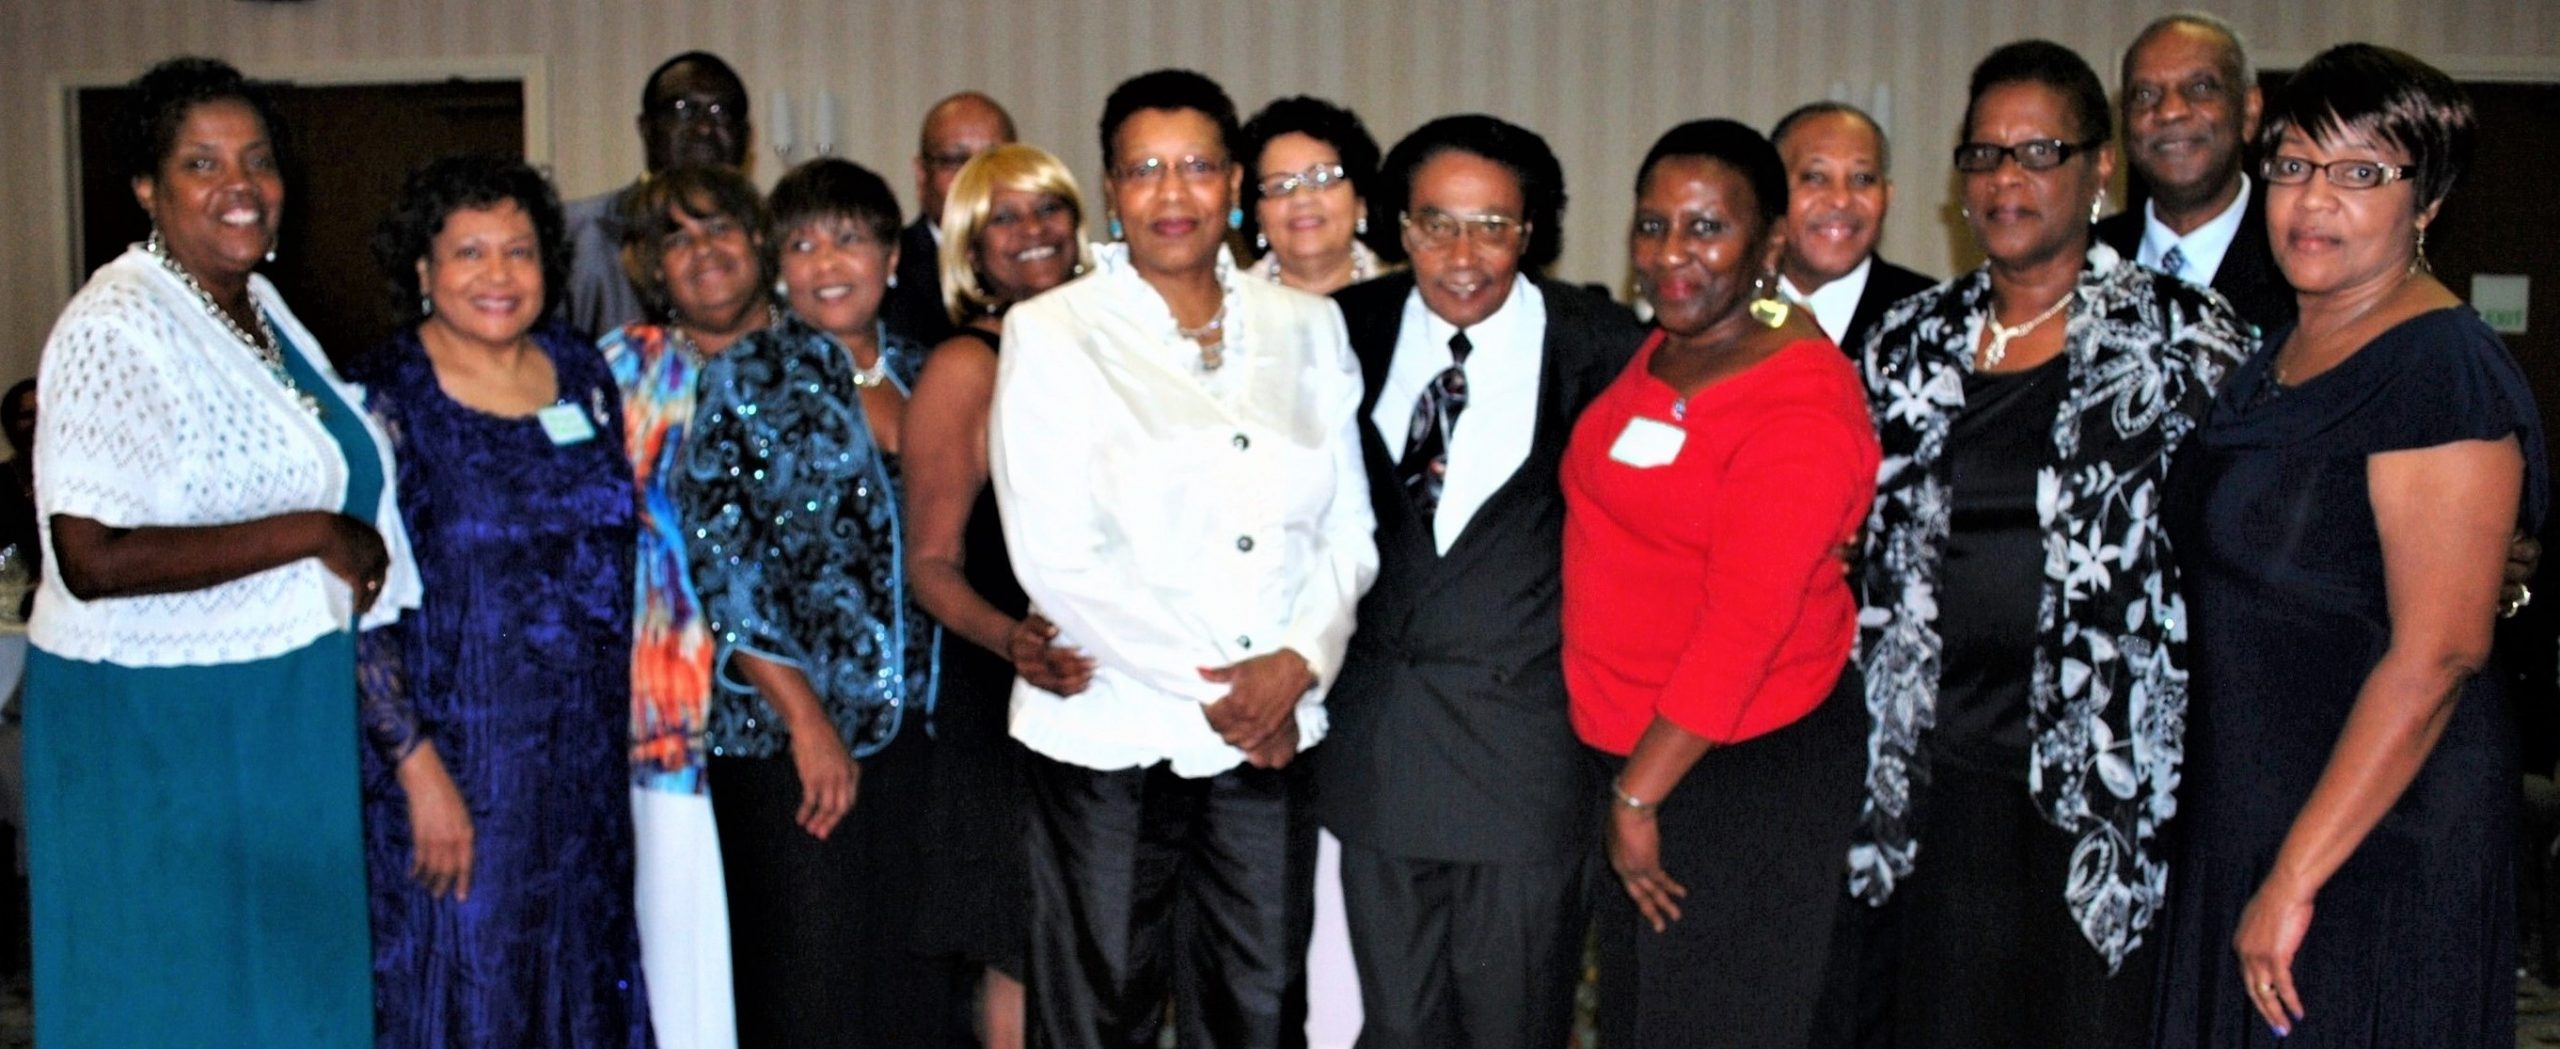 Photograph of a group of African American individuals who are dressed formally. 